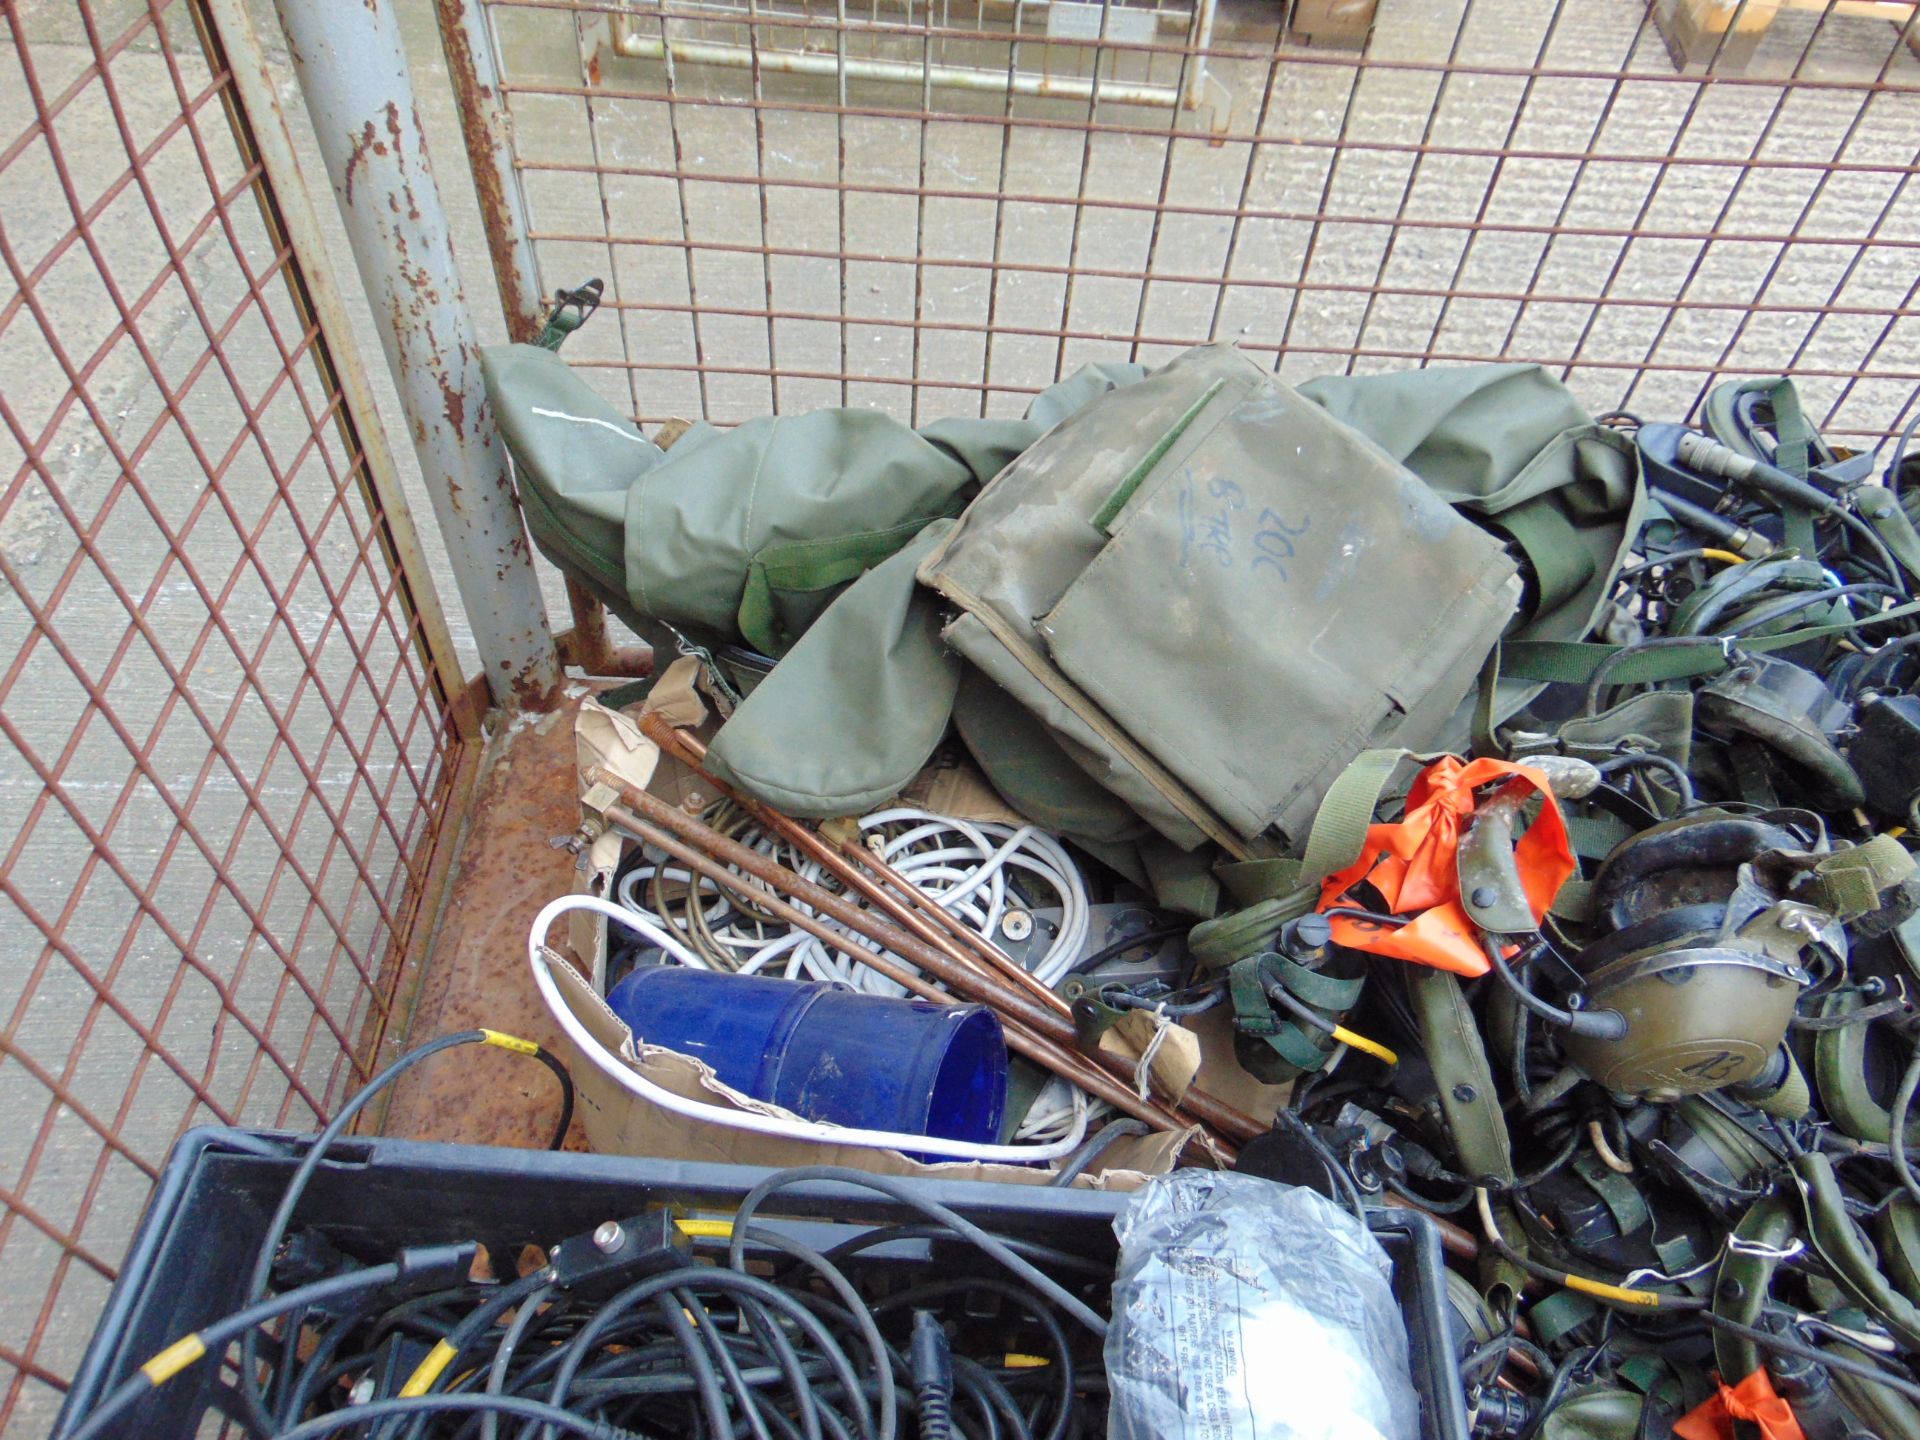 1x Stillage of Clansman Cables Headsets, Antennas Etc - Image 3 of 5